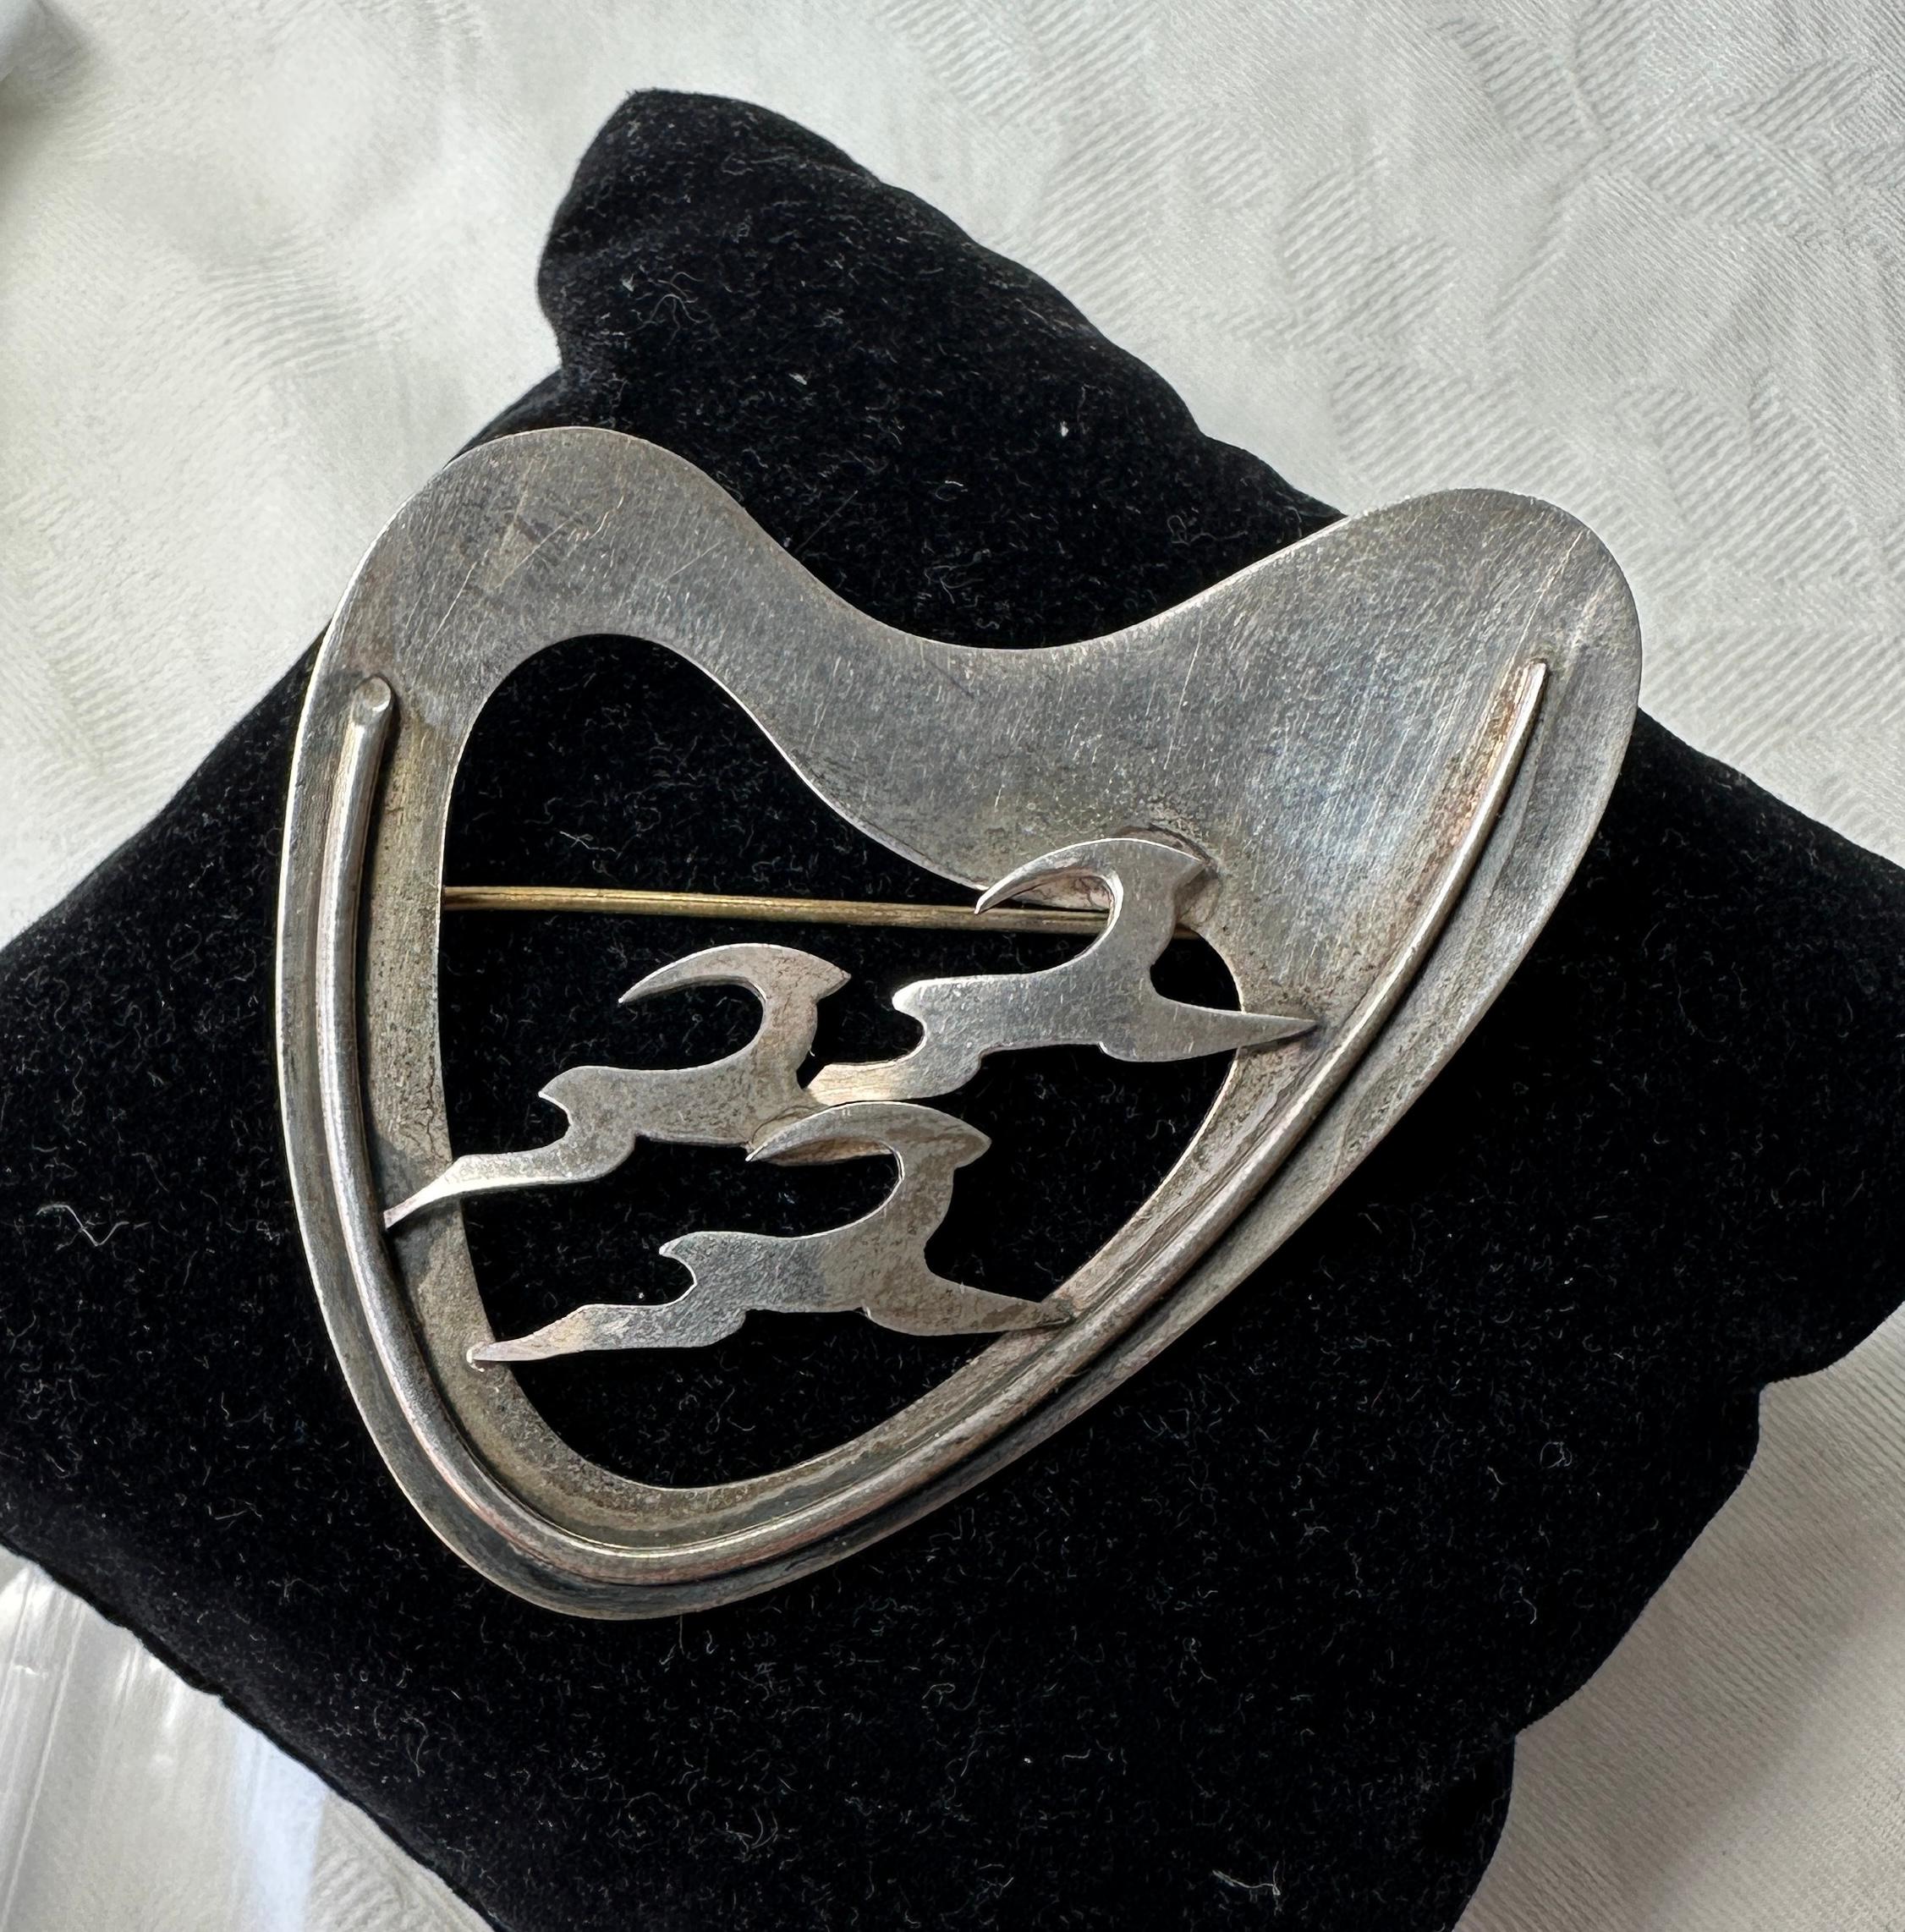 This is a wonderful and rare Denmark Sterling Silver Three Running Deer or Antelope Mid-Century Modernist Brooch. 
The brooch is fully hallmarked with a maker's mark, Sterling, Denmark and haandarbejde (hand made in Danish).  The modernist brooch